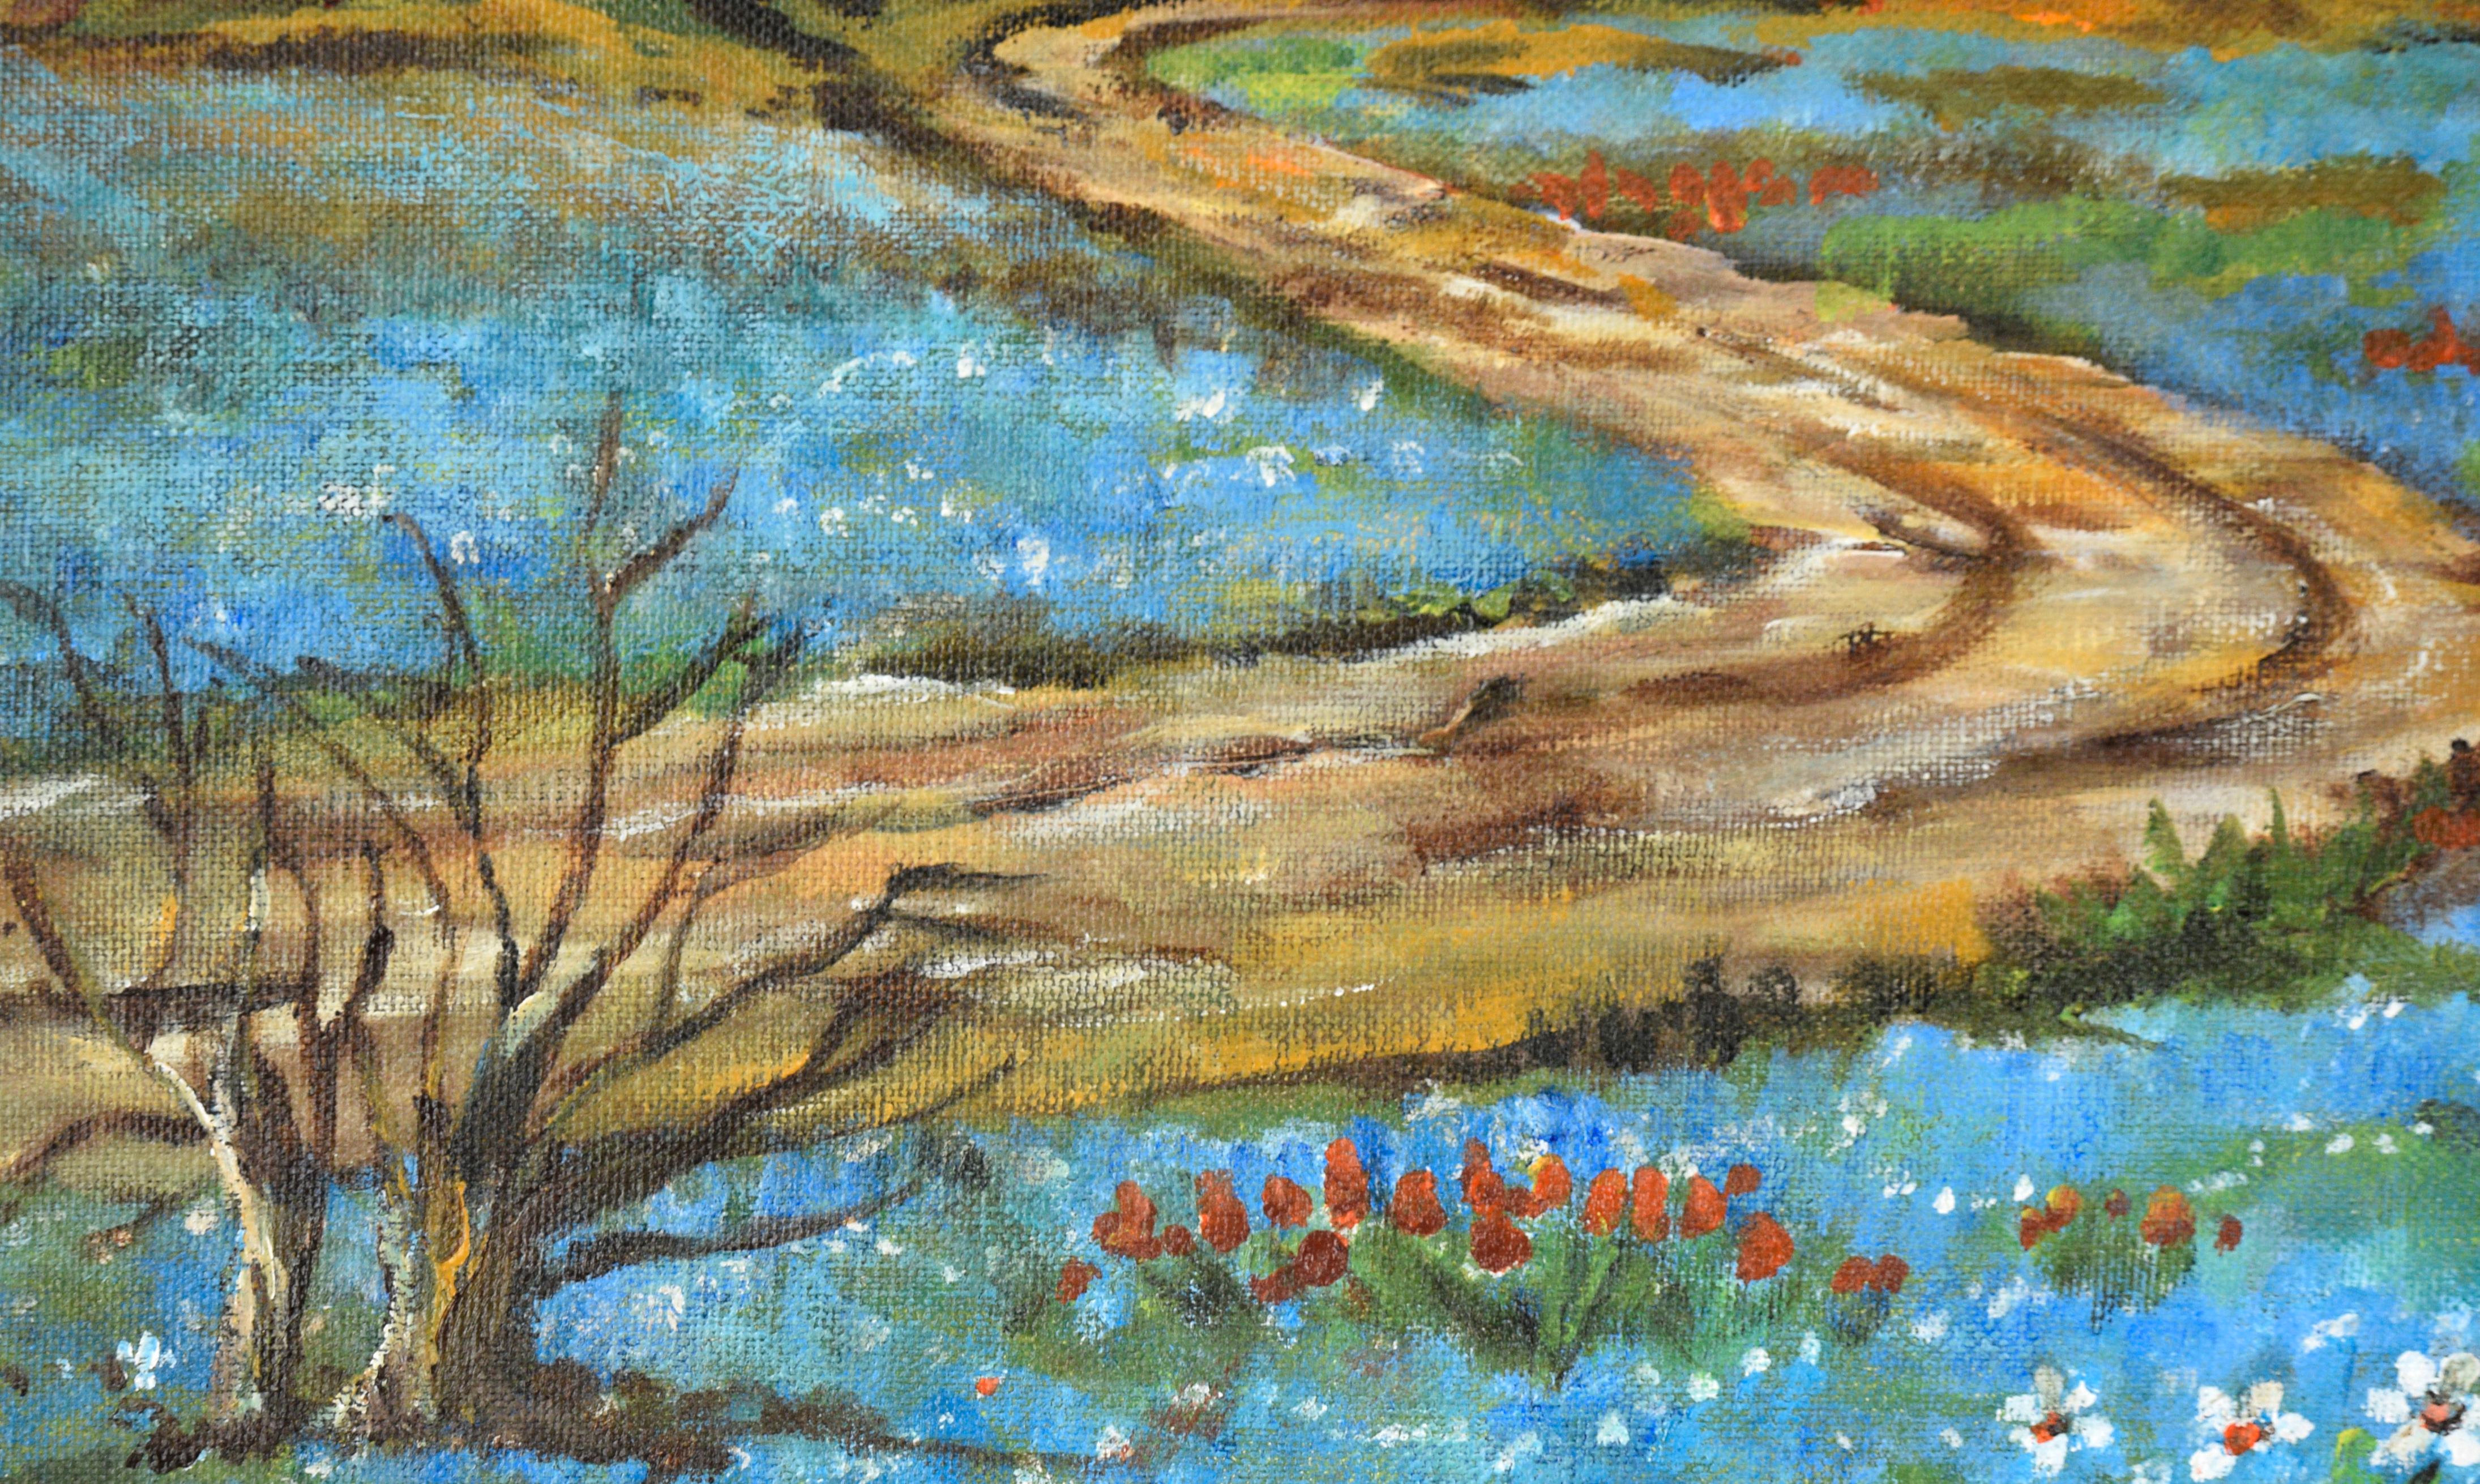 Vibrant landscape by California artist Grace Sidwell (American, 1920-2013). Bright blue, red and white flowers carpet the foreground, with a dirt path cutting through the field. The path leads to a wooden gate and stone wall, which passes just